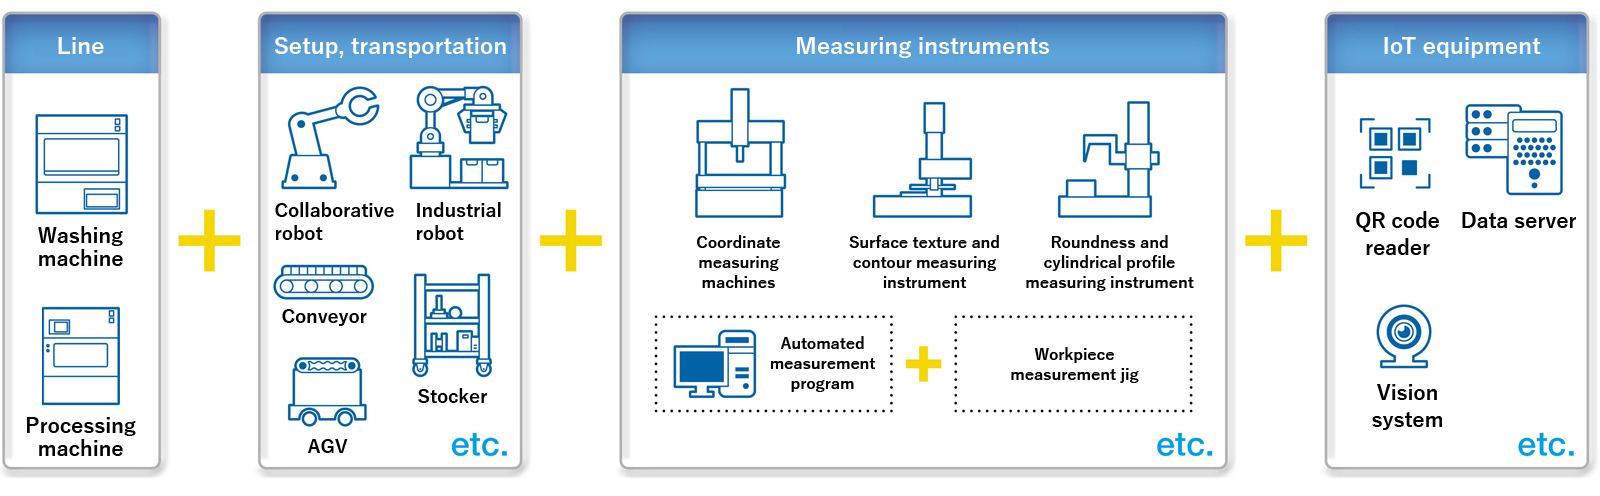 Automated measurements on processing lines